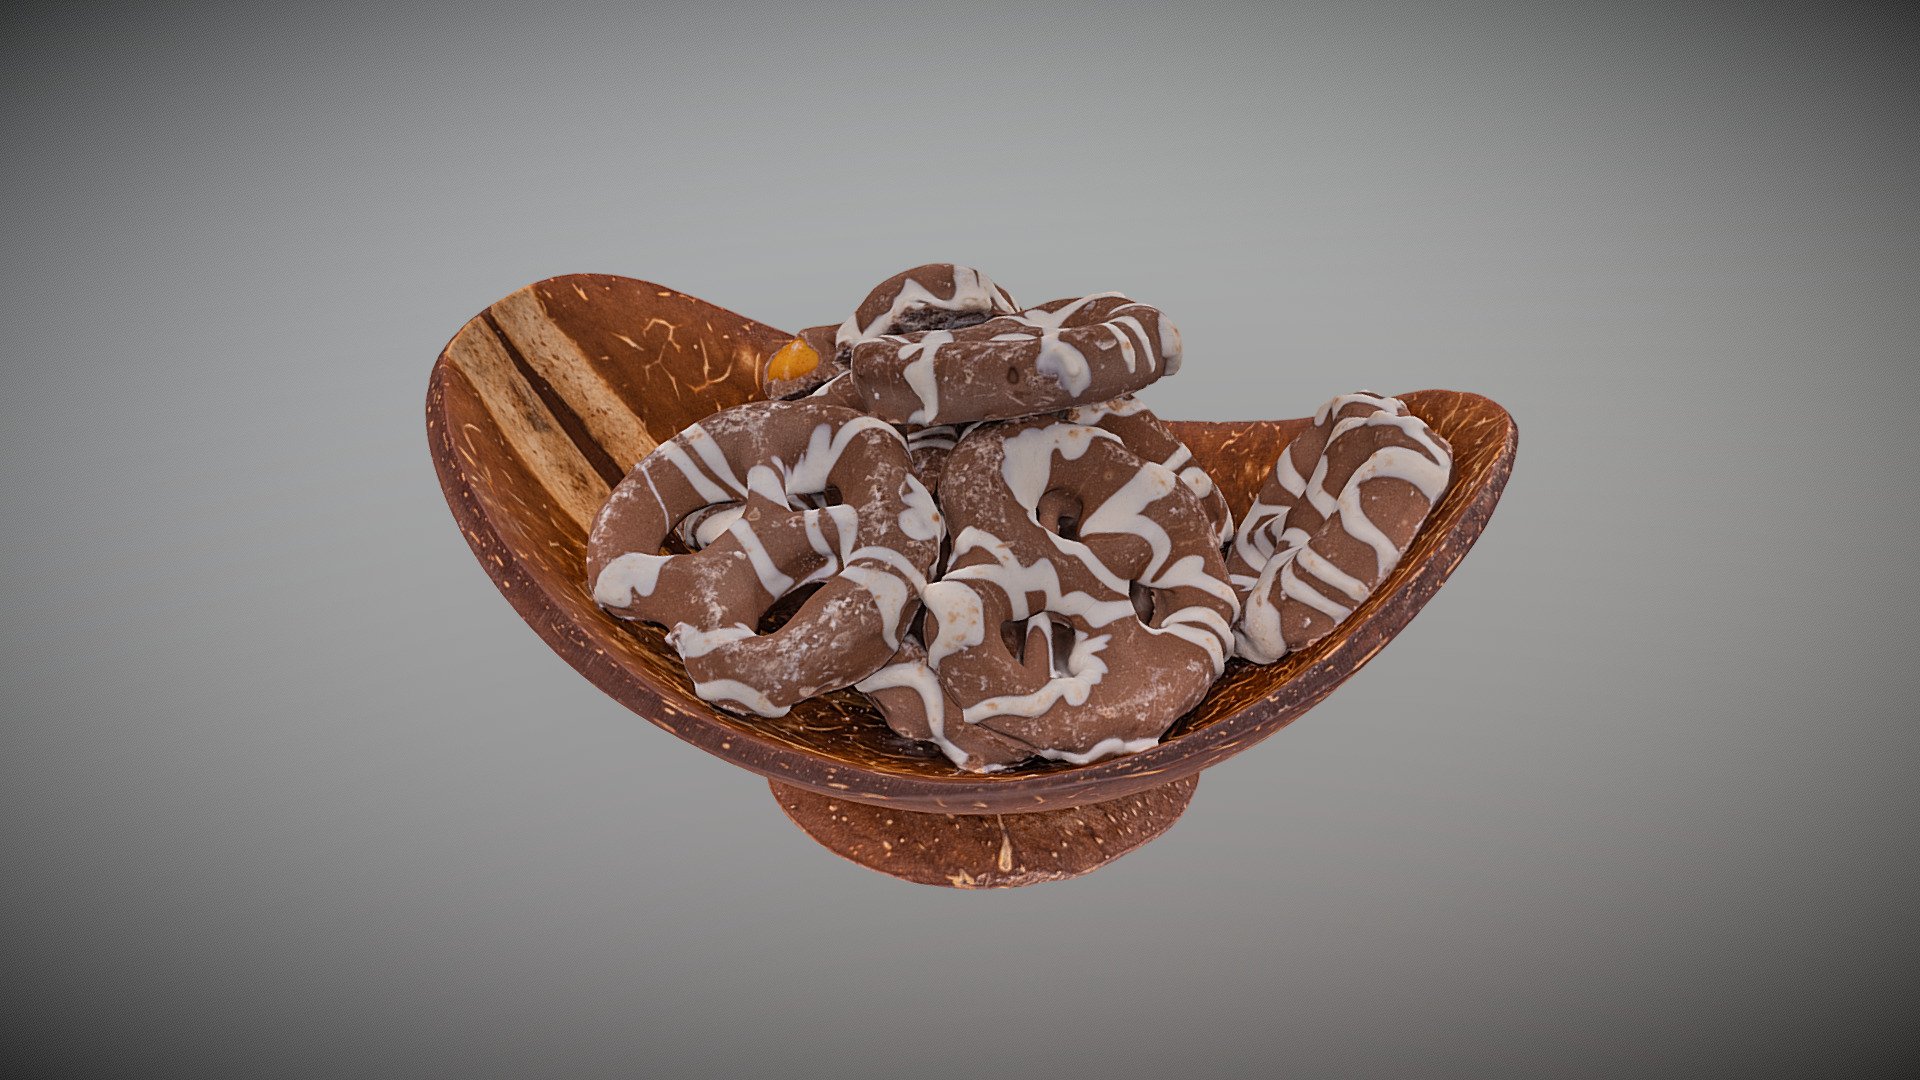 Photo-real, unlit, texturized model of Chocolate Covered Pretzels in Coconut Bowl. This object was generated using photogrammetry with a DSLR camera and images edited in Light Room, compiled in Reality Capture, and re-topologized in Insta-Mesh. The mesh is edited in Agisoft, and model retextured in Reality Capture.

Included Files:

3D Object File Types:

.OBJ

.STL

.X3d

.XML

Maps:

Normal

Bent Normal

Ambient Occlusion (AO)

Base Texture

Texture

Texture File Types:

.PNG

.JPG

.TIFF

High-Poly Model or GLB File available upon request.

For more information and contact info, visit us at highsierra3d.com - Chocolate Covered Pretzels in Coconut Bowl - Buy Royalty Free 3D model by High Sierra 3D (@highsierra3d) 3d model